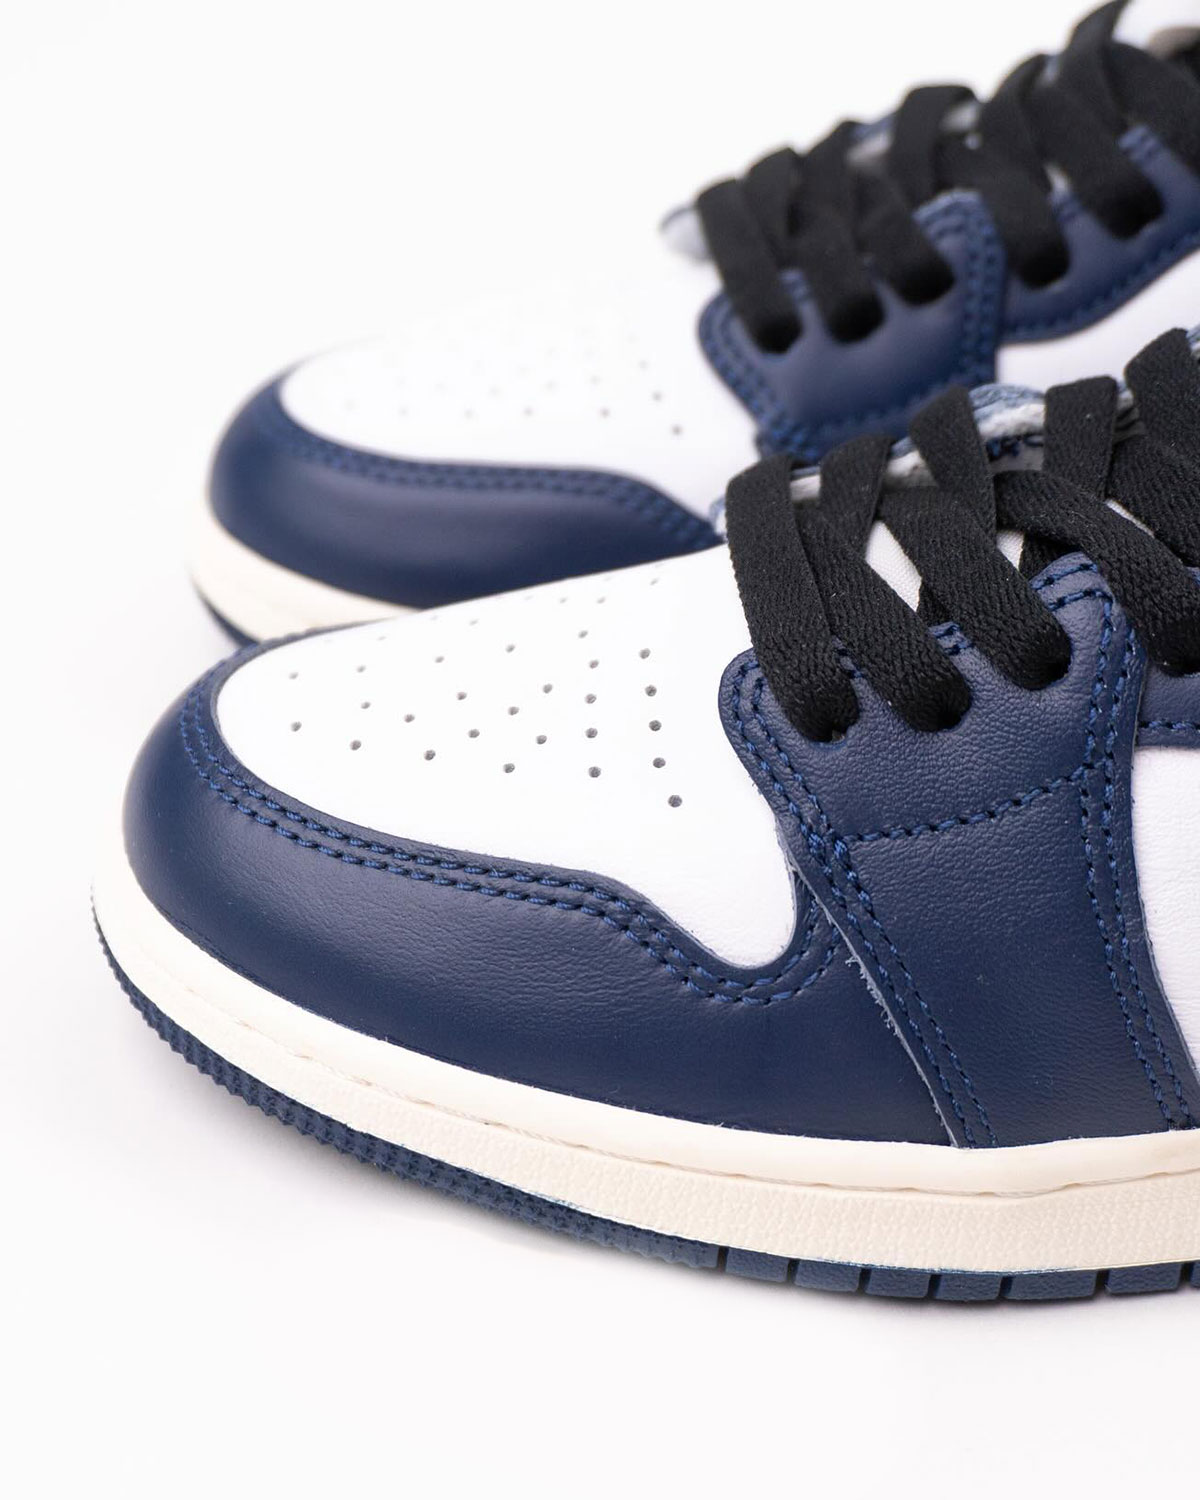 Do you really know the history of the Air Jordan Selection 1 Retro High Og Midnight Navy Dz5485 401 6